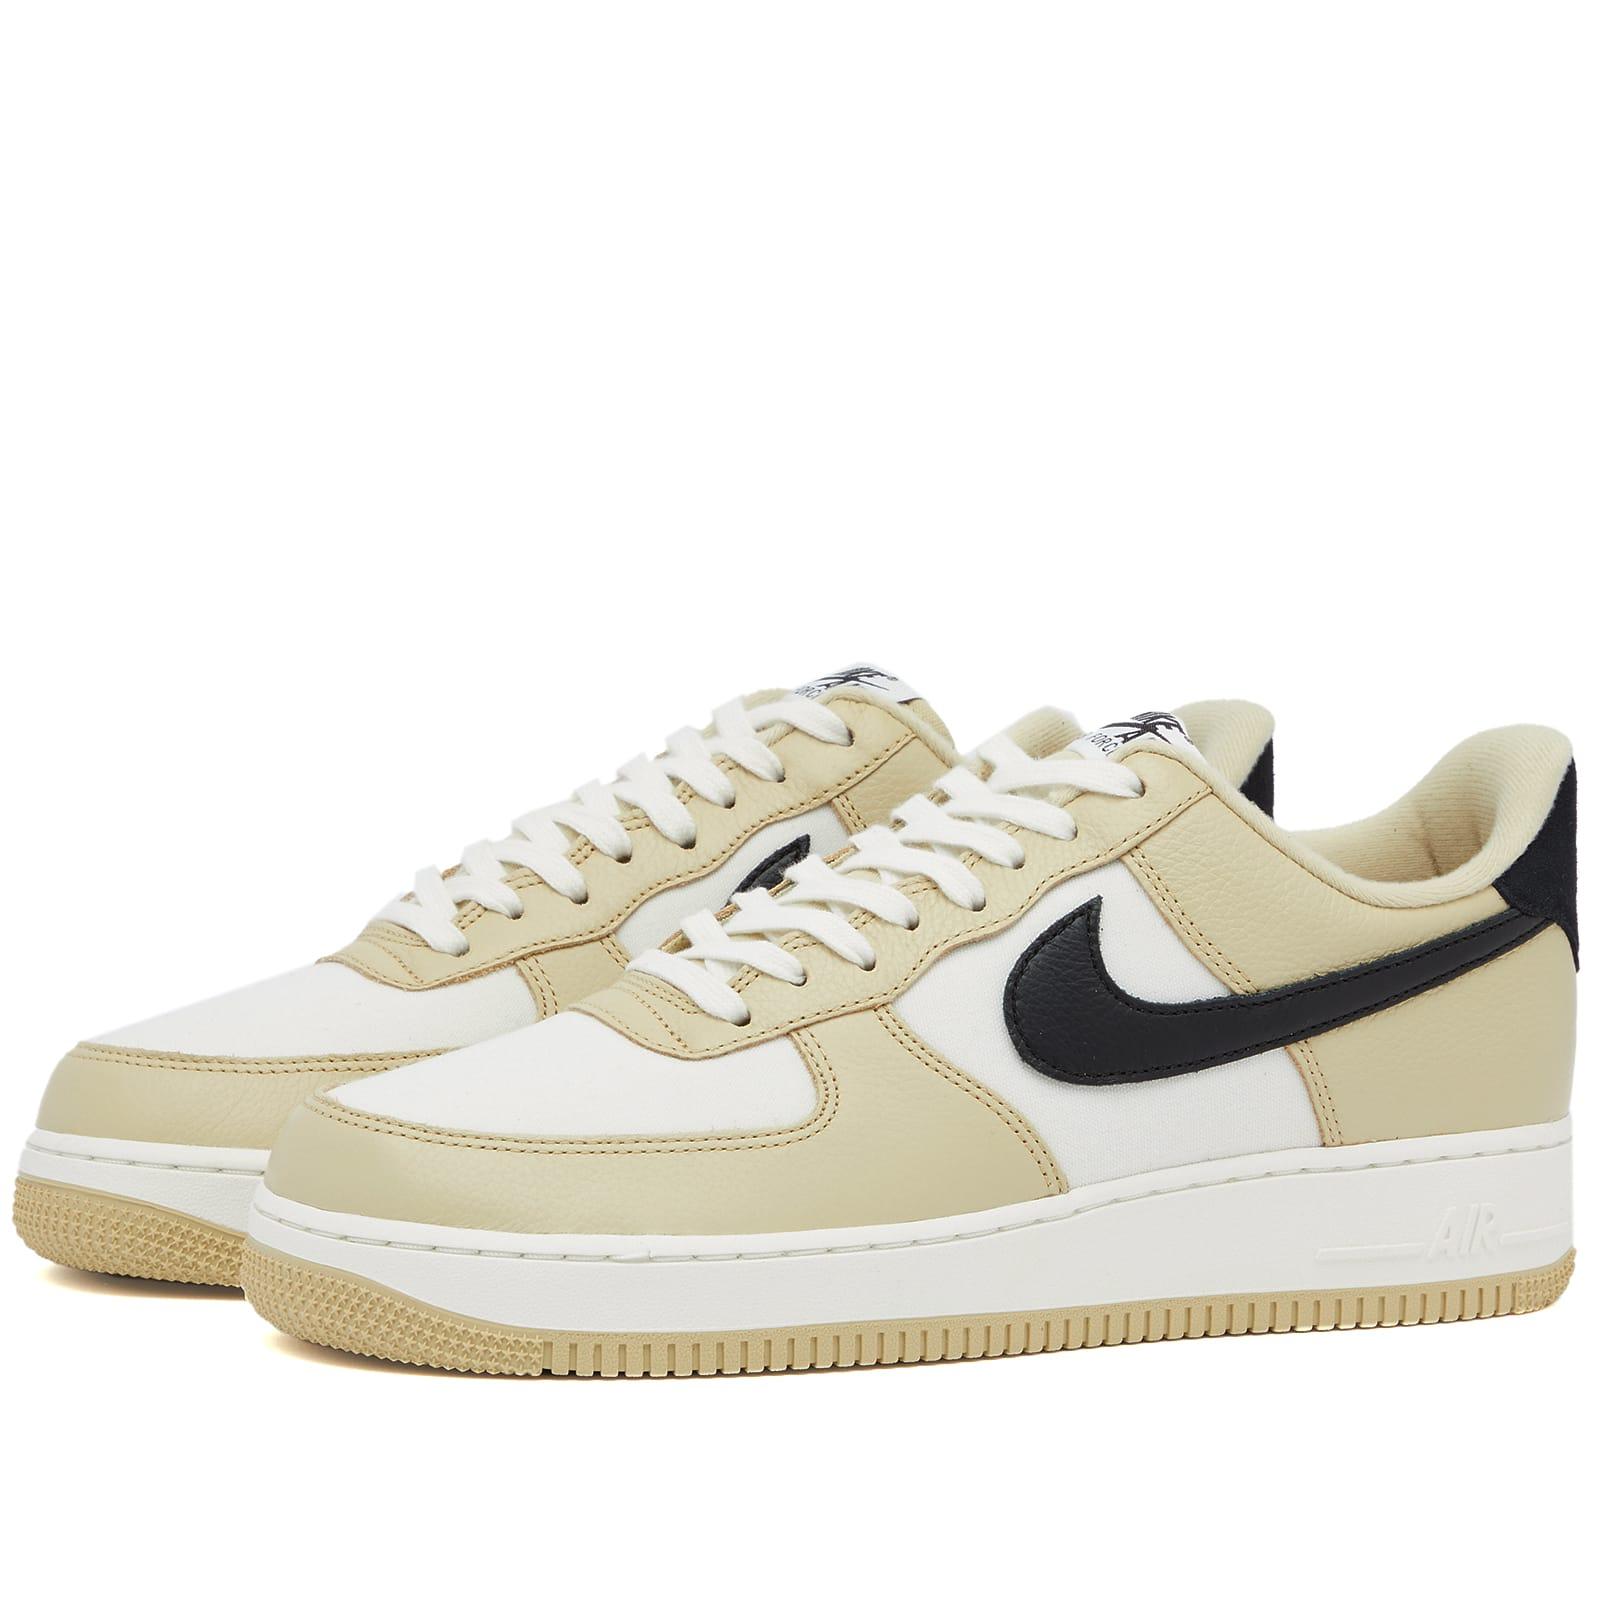 Nike Air Force 1 '07 Lx Nbhd Shoes in Natural for Men | Lyst